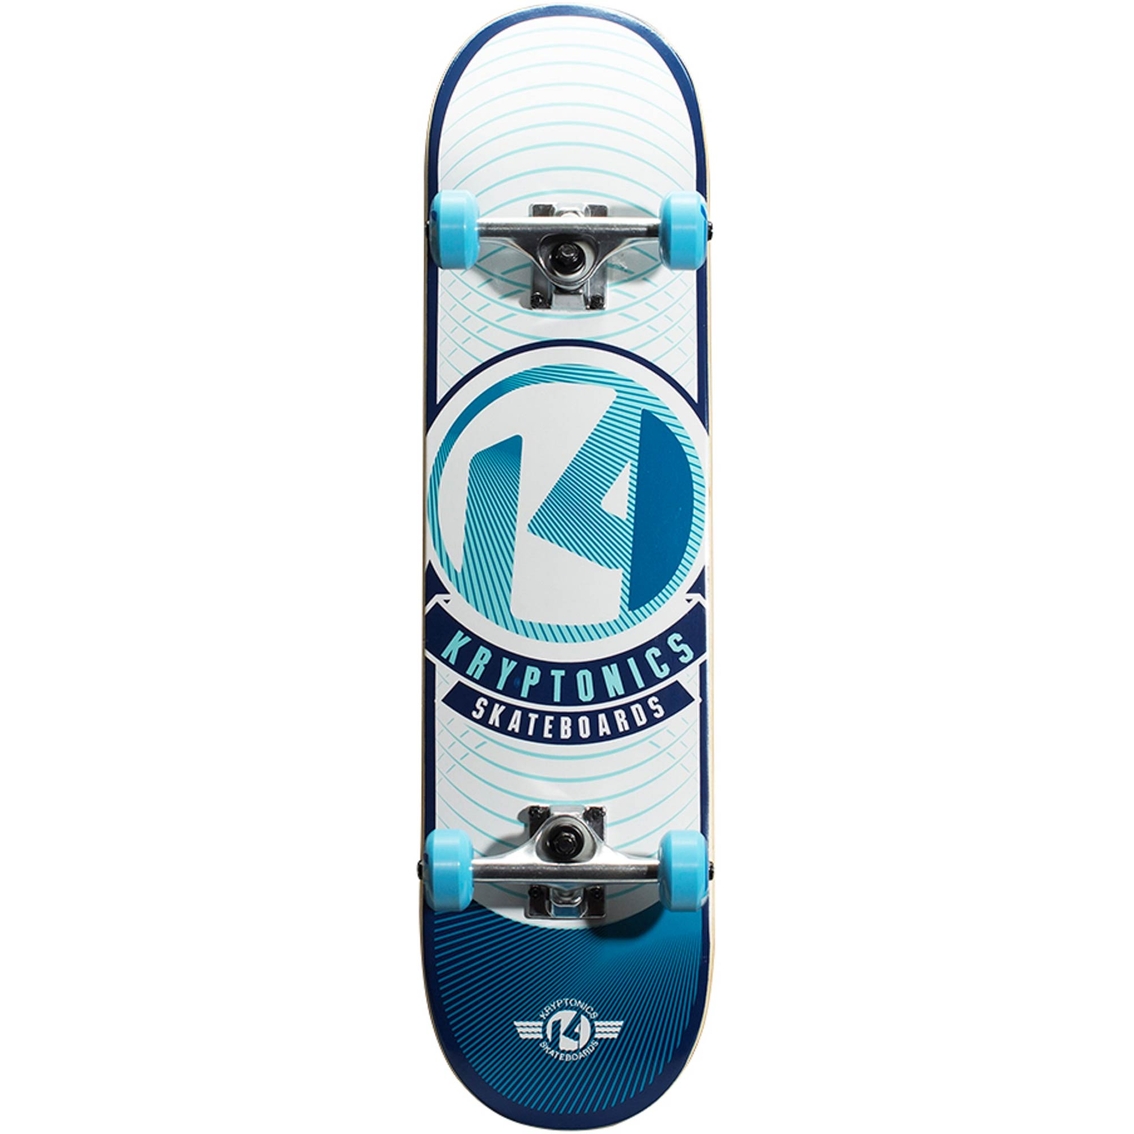 Kryptonics POP 31 In. Complete Skateboard, Blue Rays Graphic - Image 2 of 4